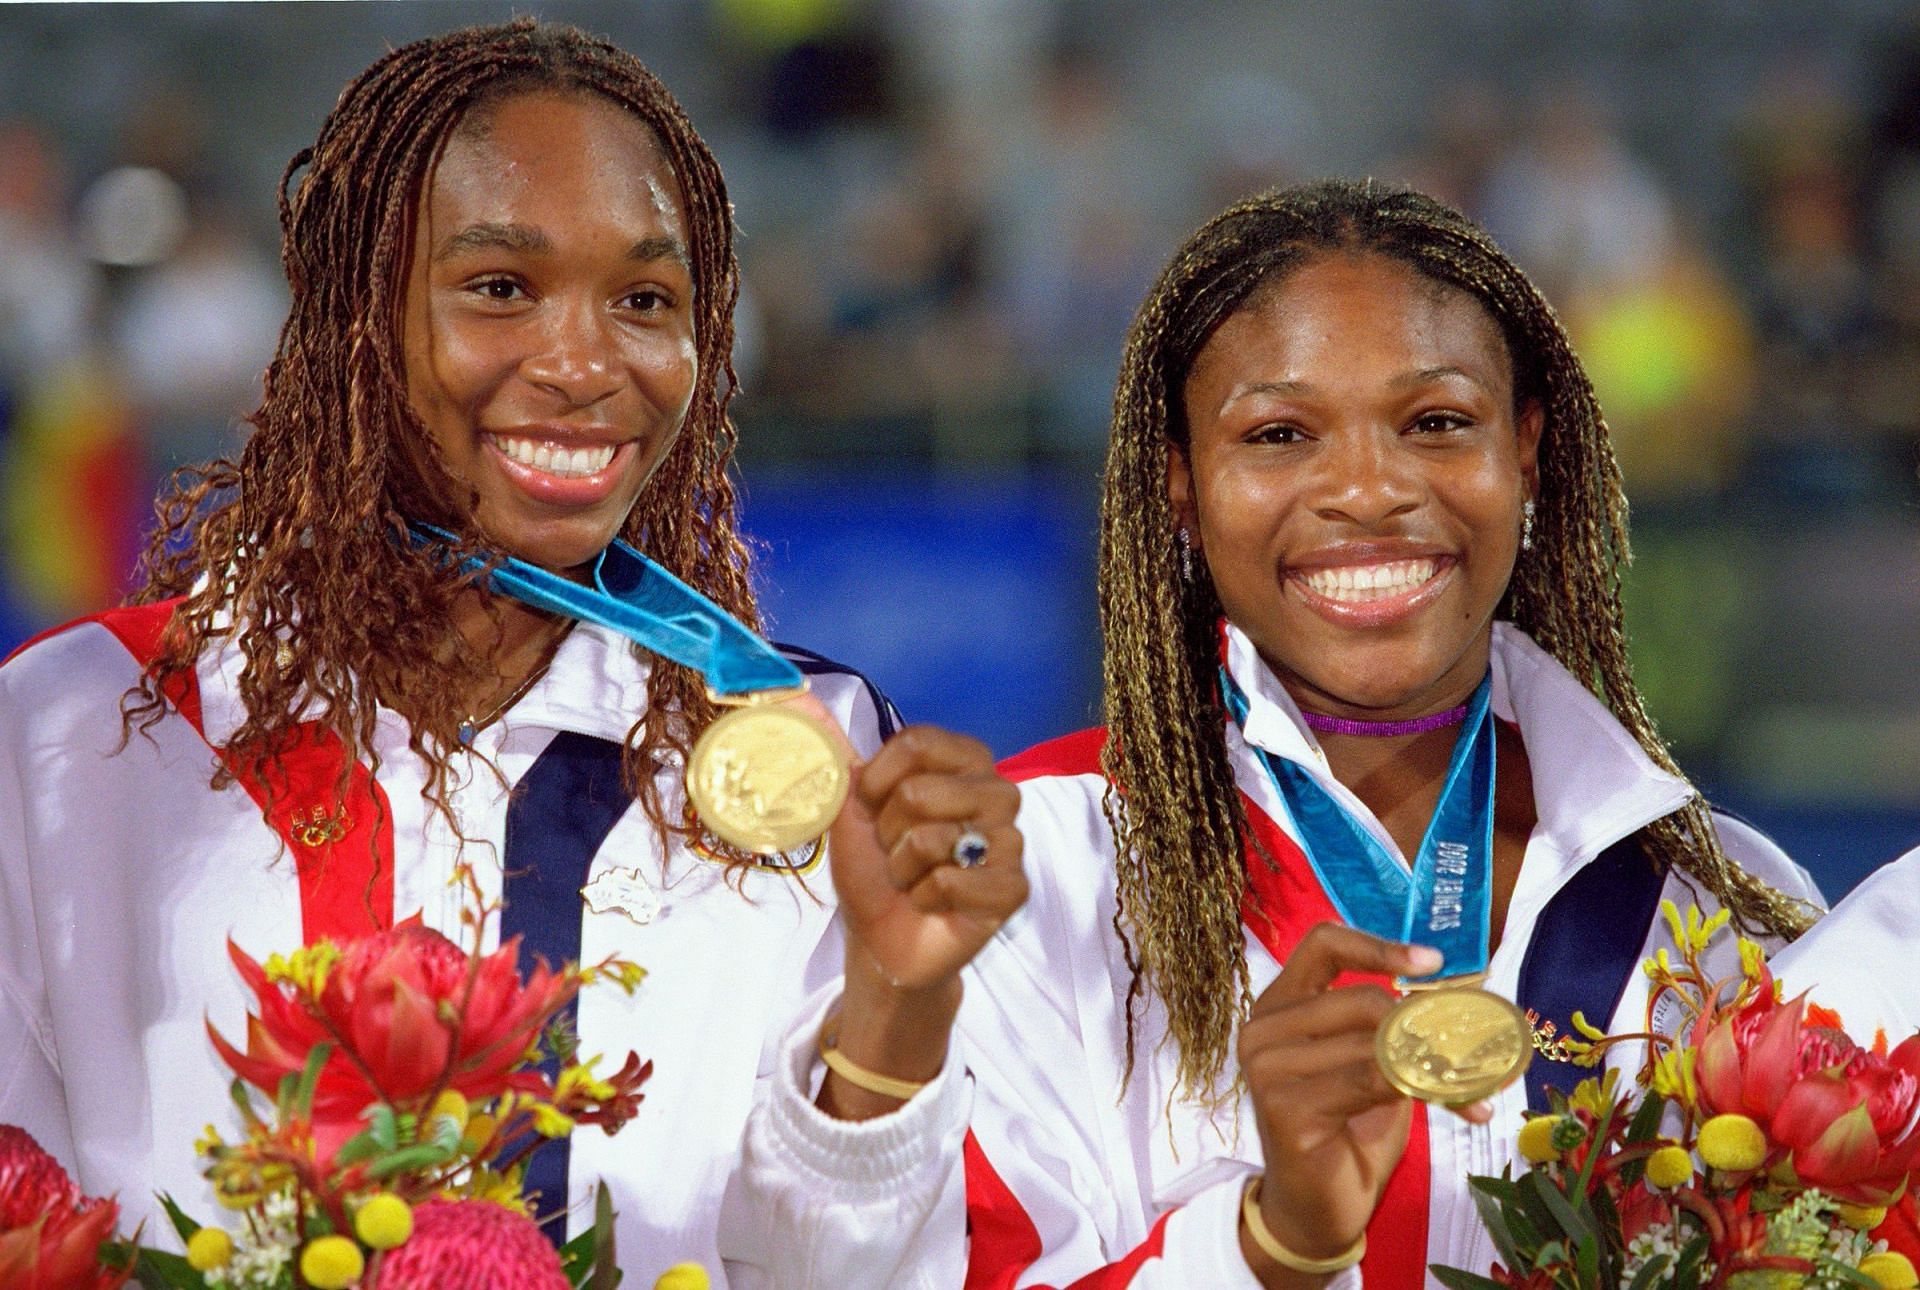 Venus Williams and Serena Williams won gold at Sydney 2000 Olympic Games